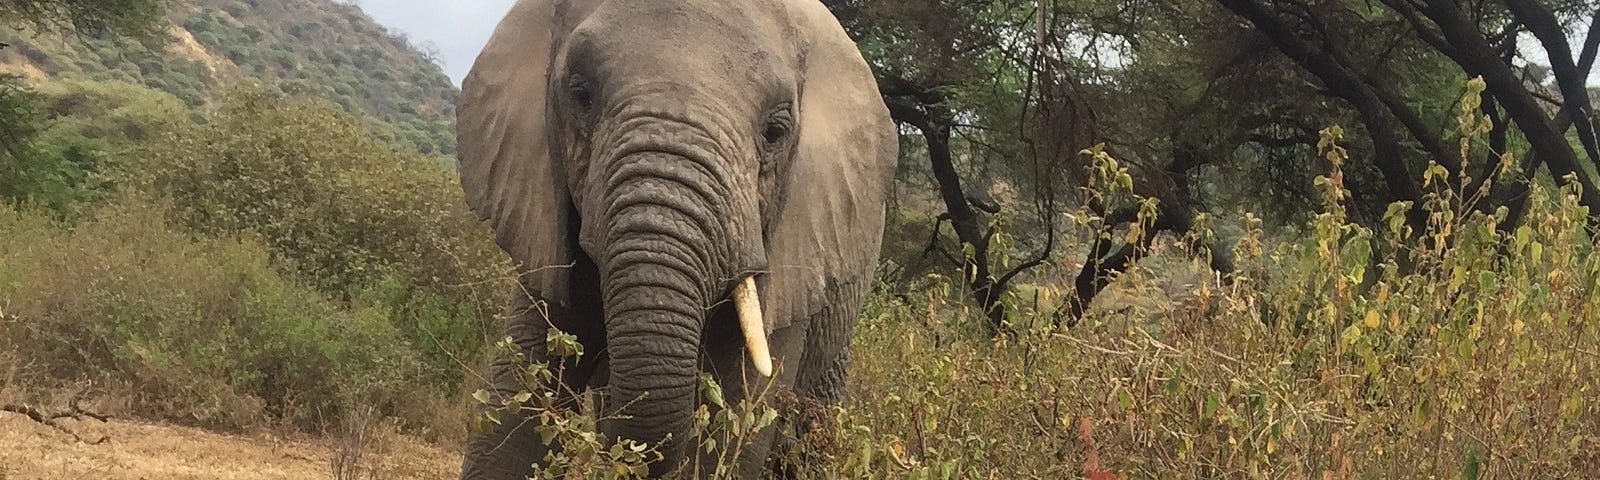 A large elephant with tusks stands among the African grassland. It is looking directly at the camera and its ears are pulled back